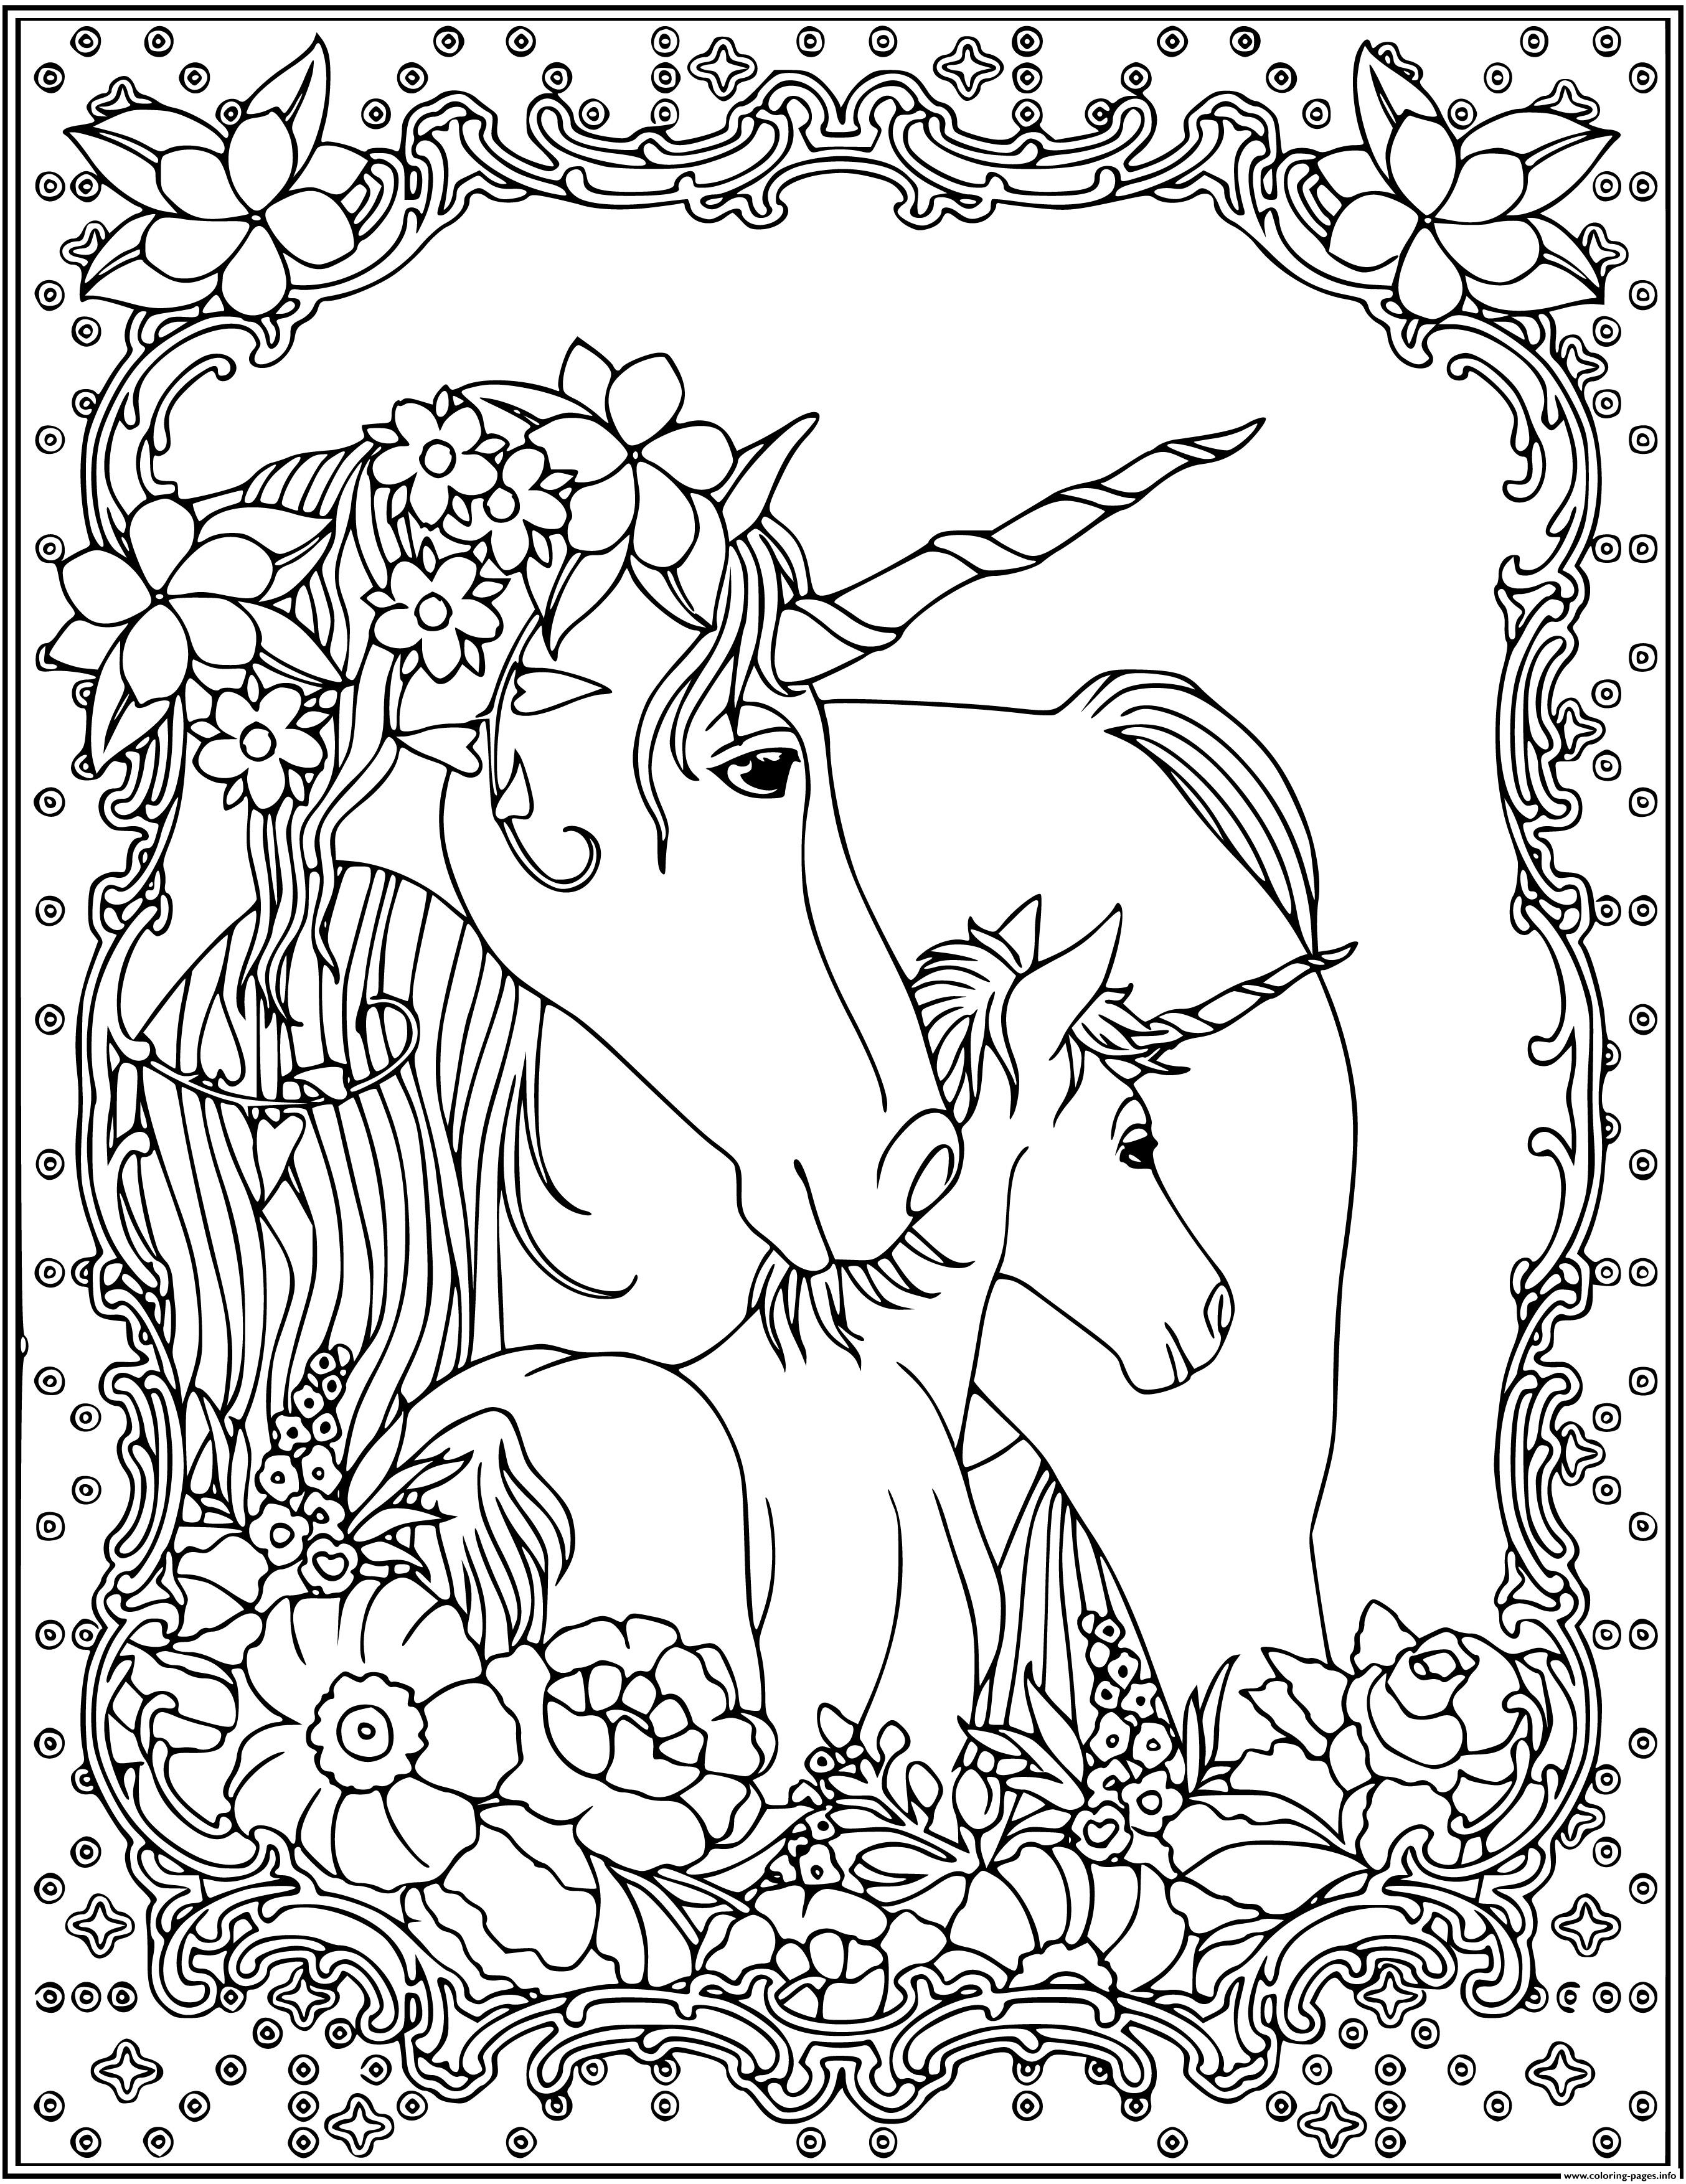 Unicorn Head Adult Coloring page Printable